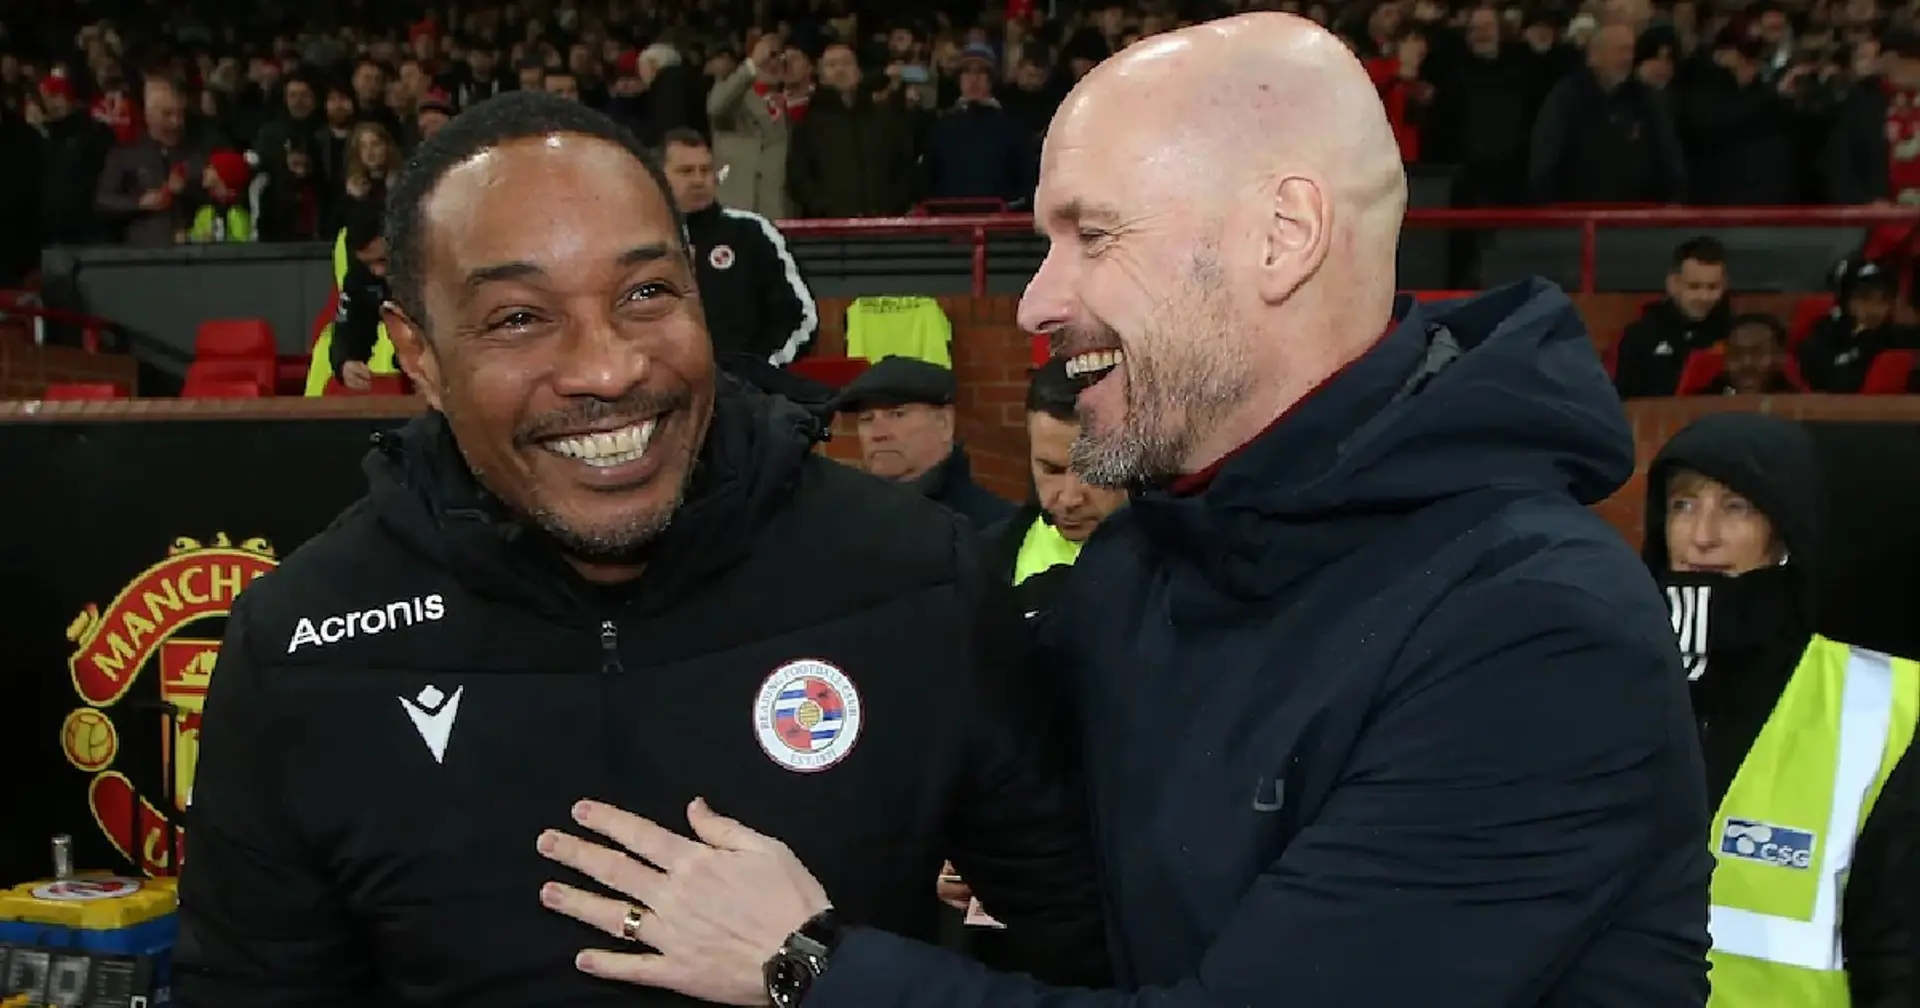 Paul Ince: 'One year ago we'd have felt we could beat United. Ten Hag has lifted the club'